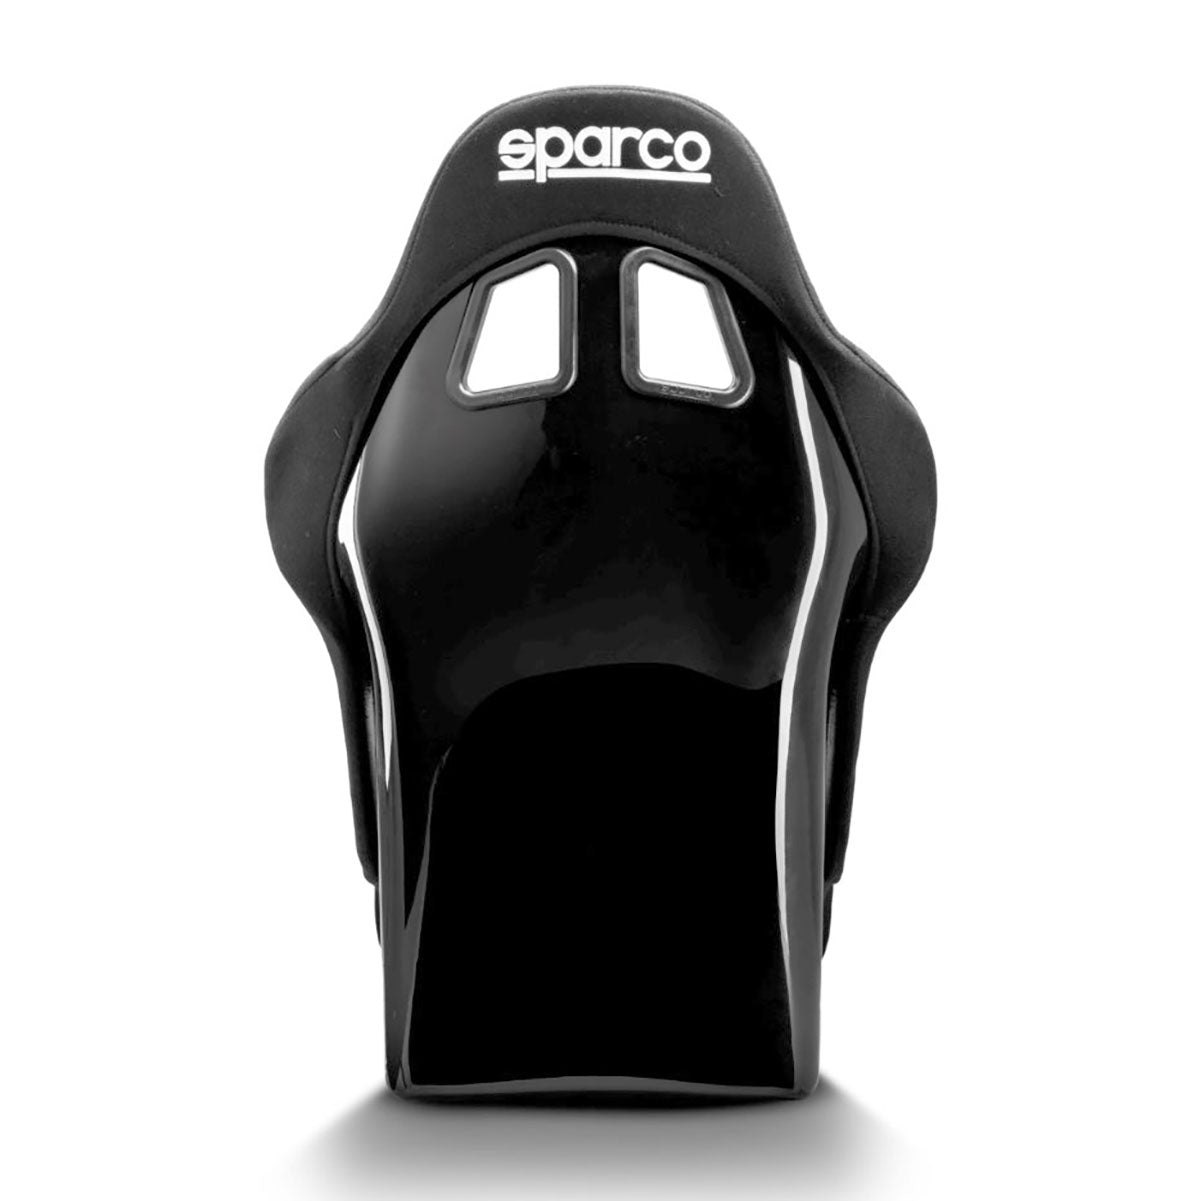 Sparco Italy EVO XL QRT Cushion replacement